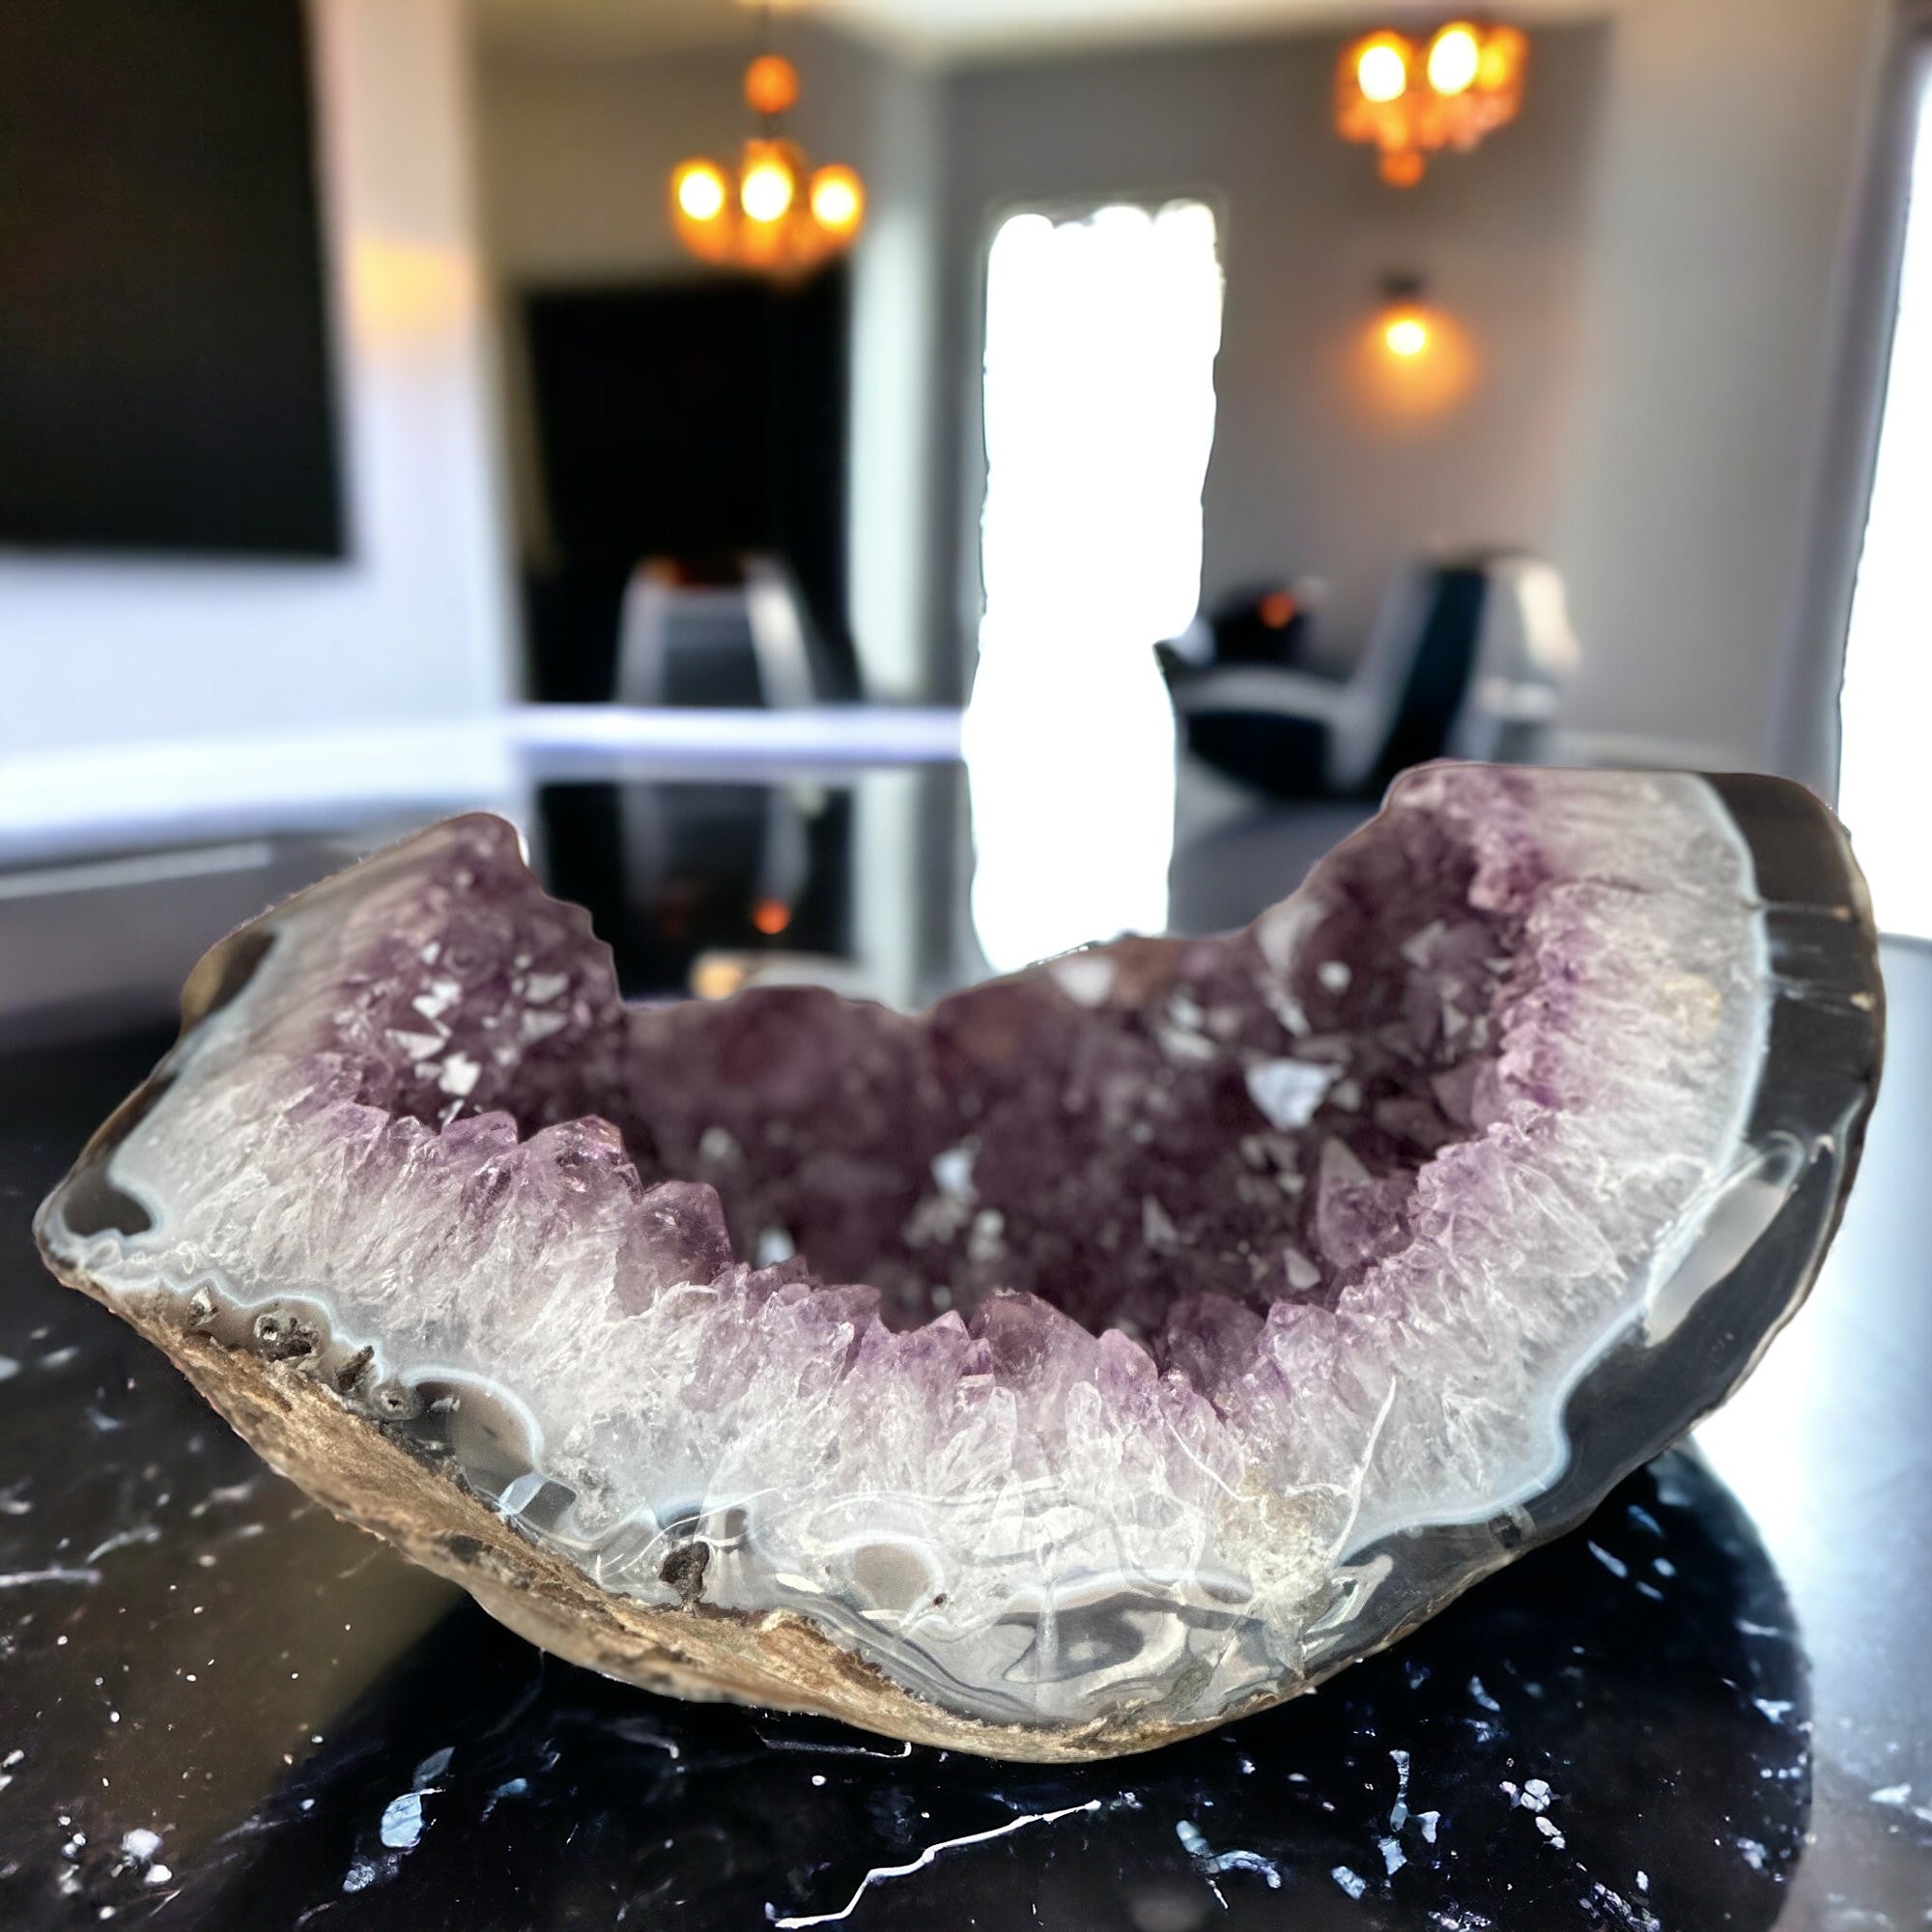 Extra Large Amethyst Geode Cave, Oval shaped Full polished stone, Stunning decor piece, Giant Crystal